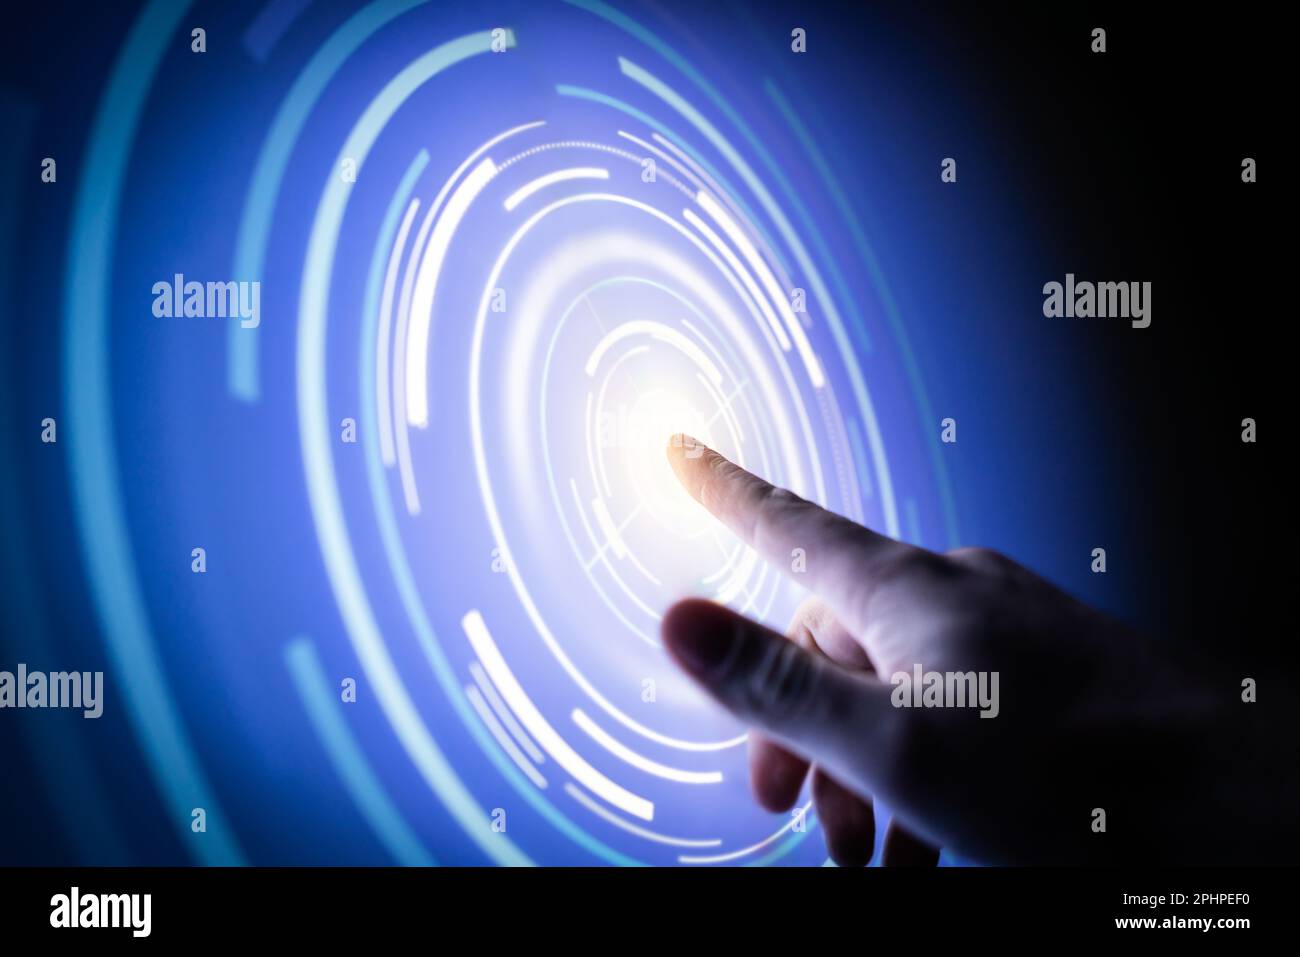 Touch technology in future. Digital network, metaverse or science tech innovation. Futuristic hologram screen. Finger in abstract virtual circle. Stock Photo